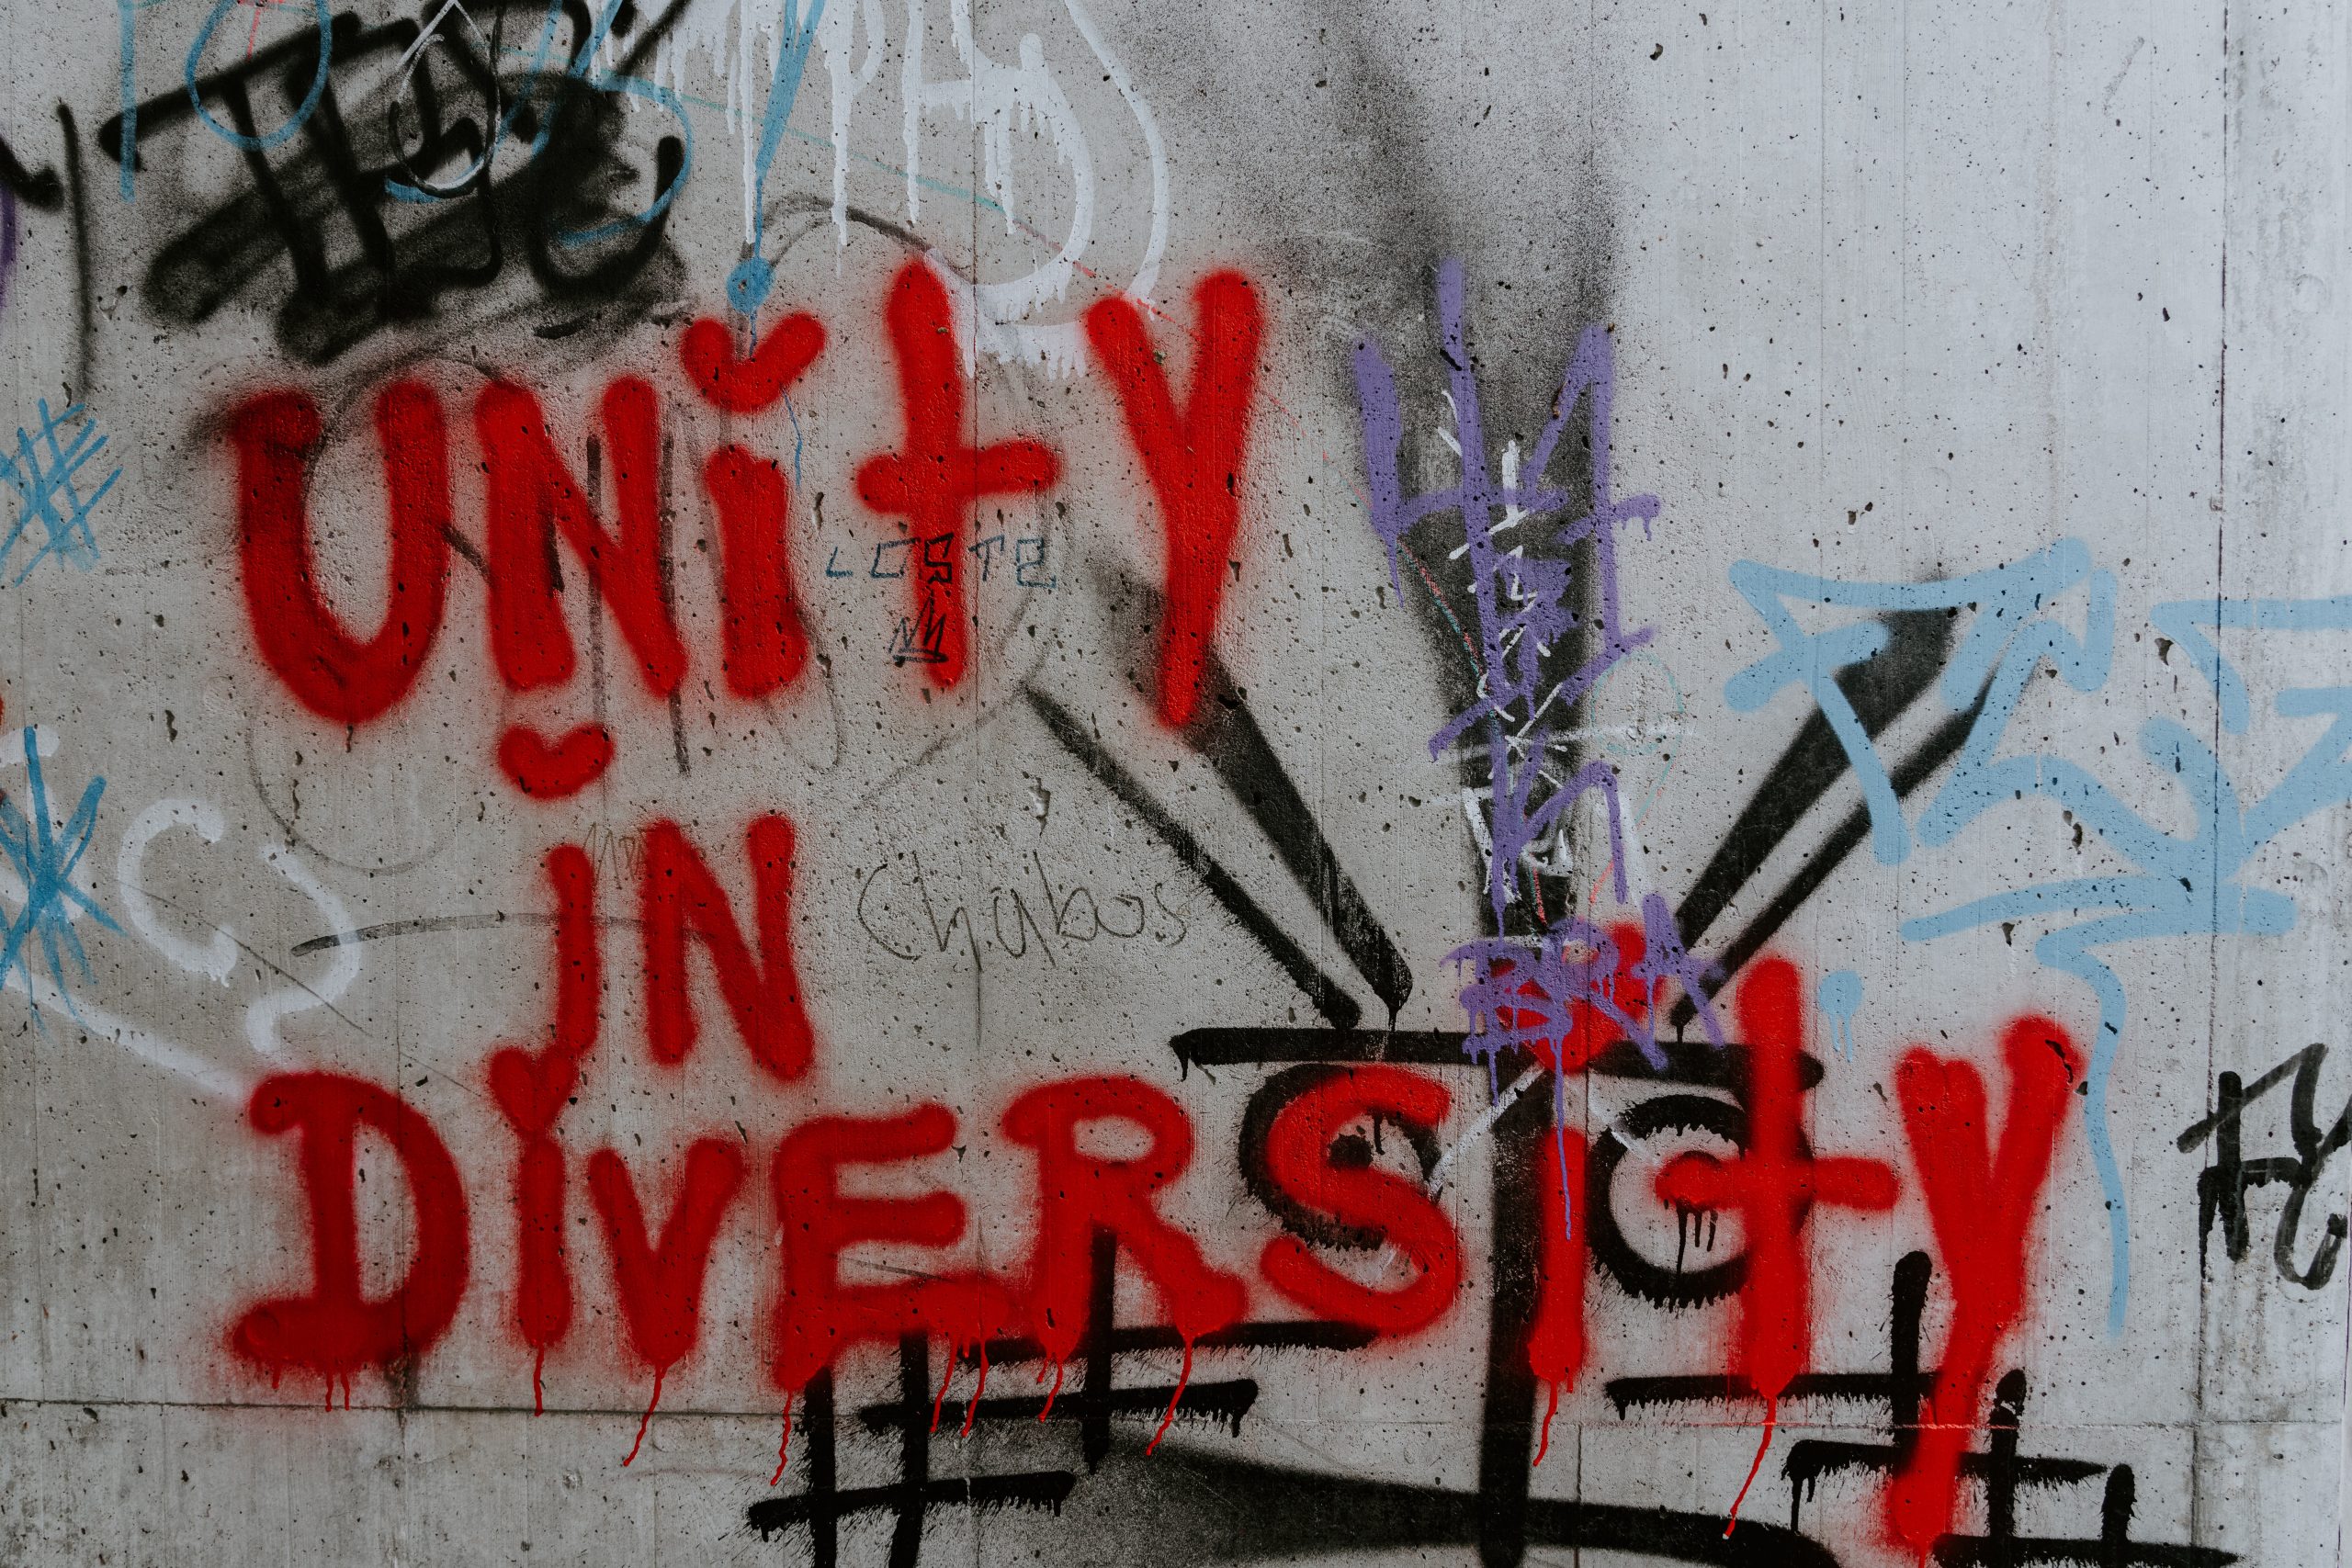 Unity in diversity spray paint on wall